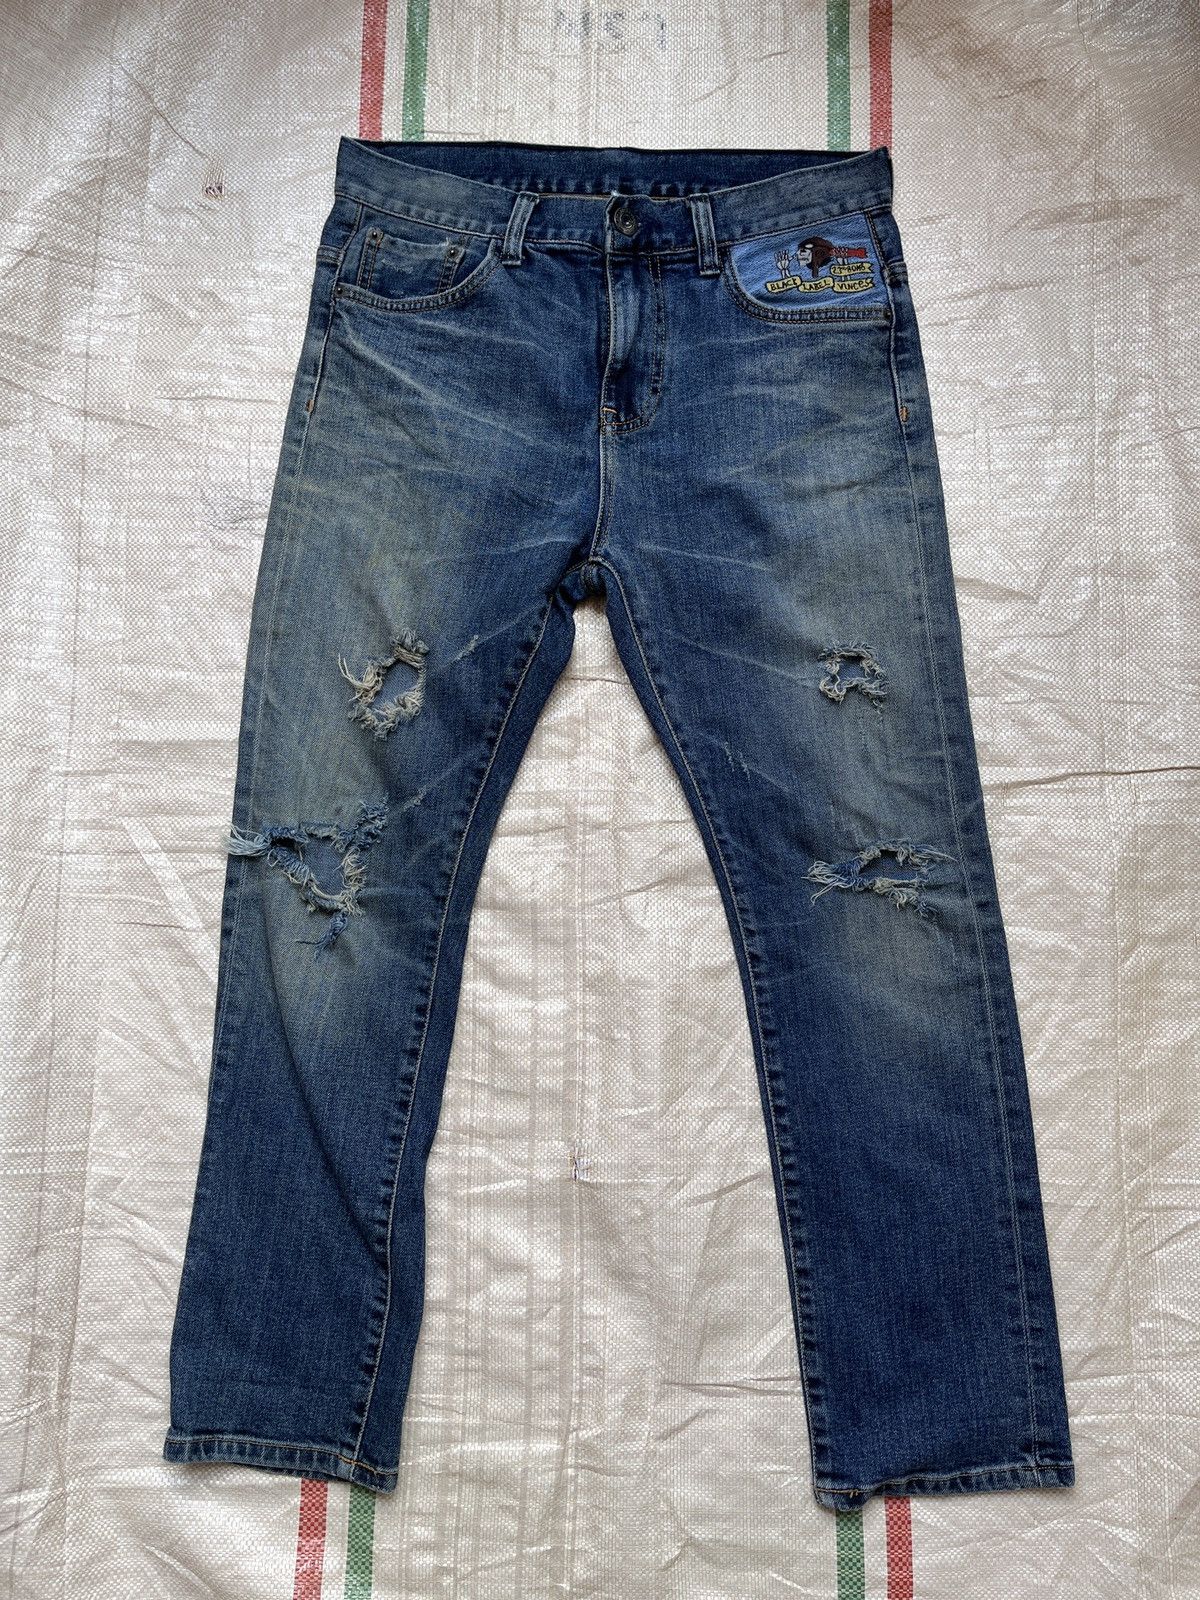 Distressed Denim - Ripped Black Label Denim Jeans With Patches At Pocket - 20